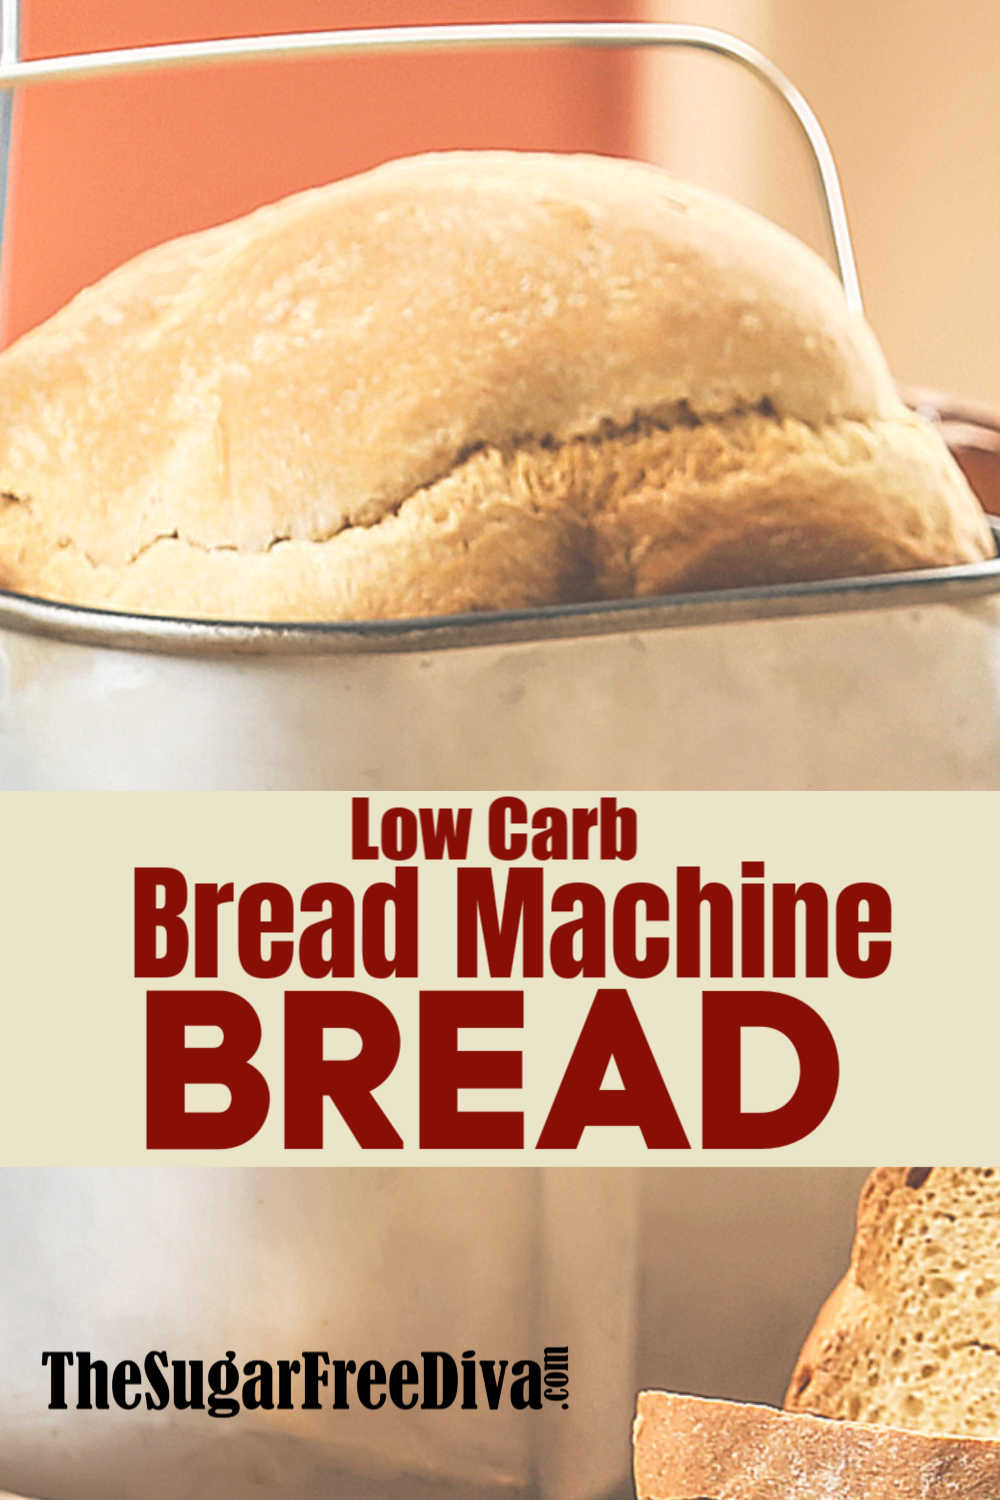 Low carb bread in bread machine